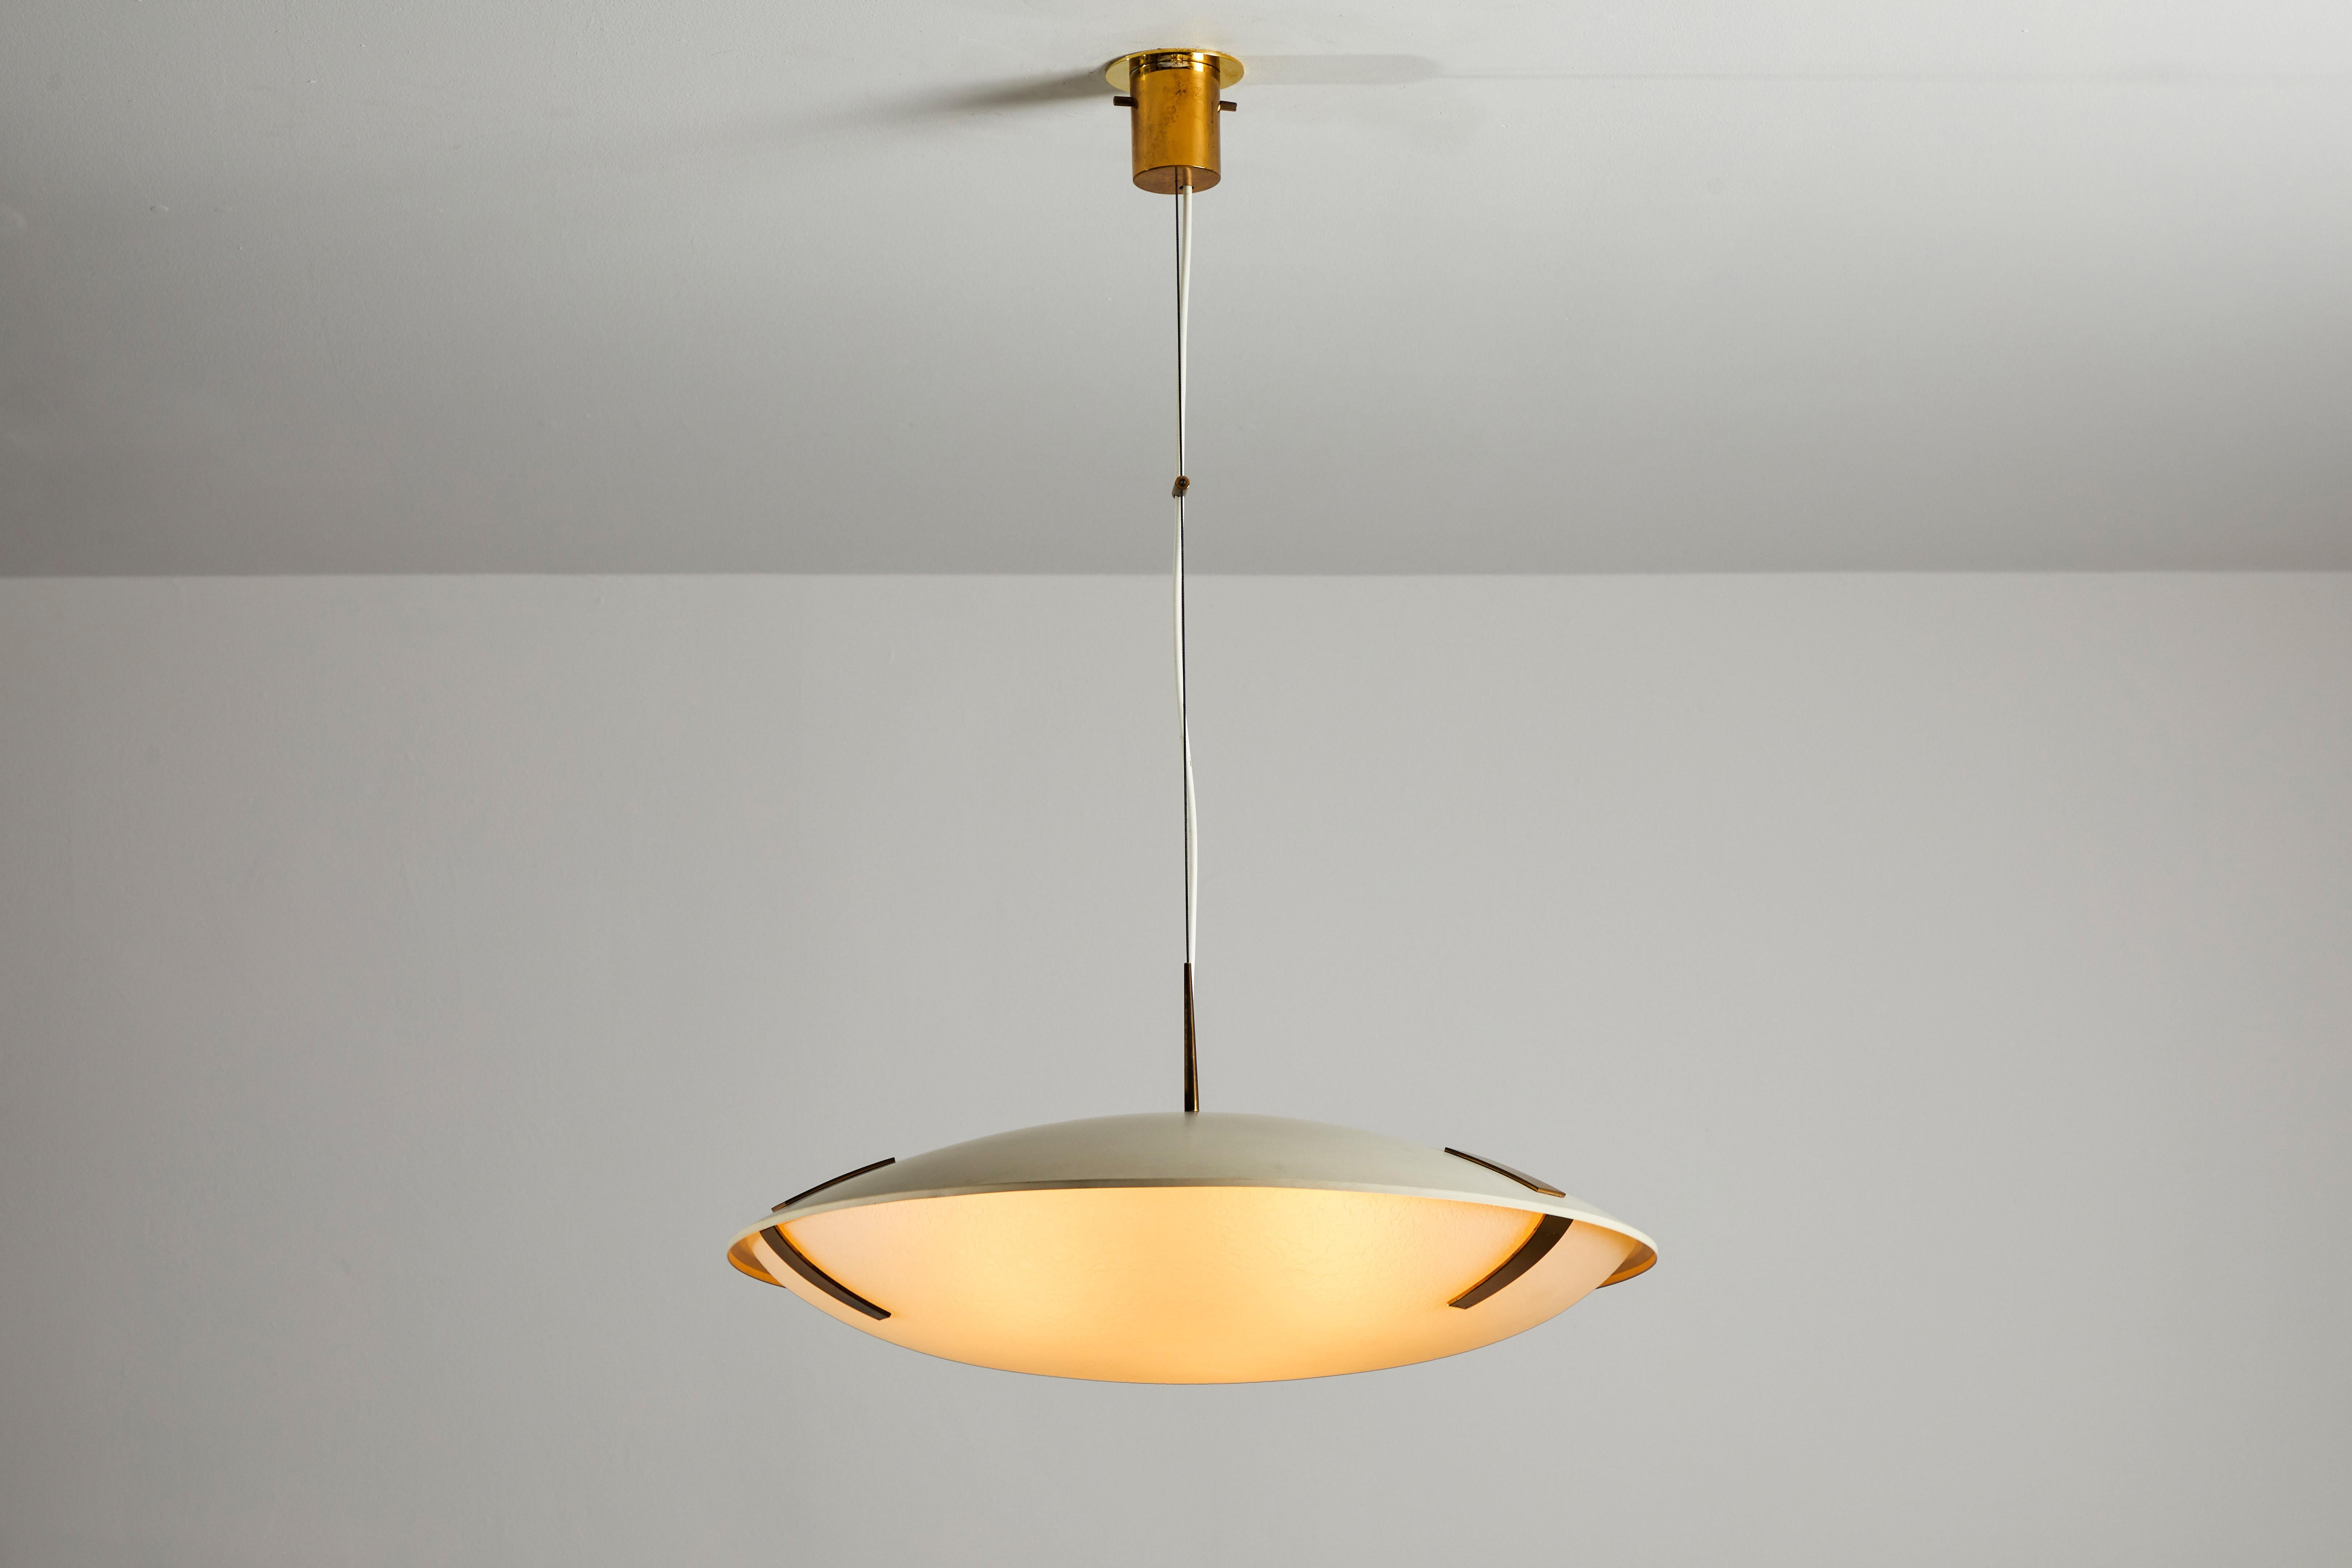 Suspension light by Stilnovo. Manufactured in Italy, circa 1960s. Enameled aluminum, brass and textured glass. Custom brass ceiling plate. Rewired for U.S. junction boxes. Takes three E27 100w maximum bulbs. Bulbs provided as a onetime courtesy.